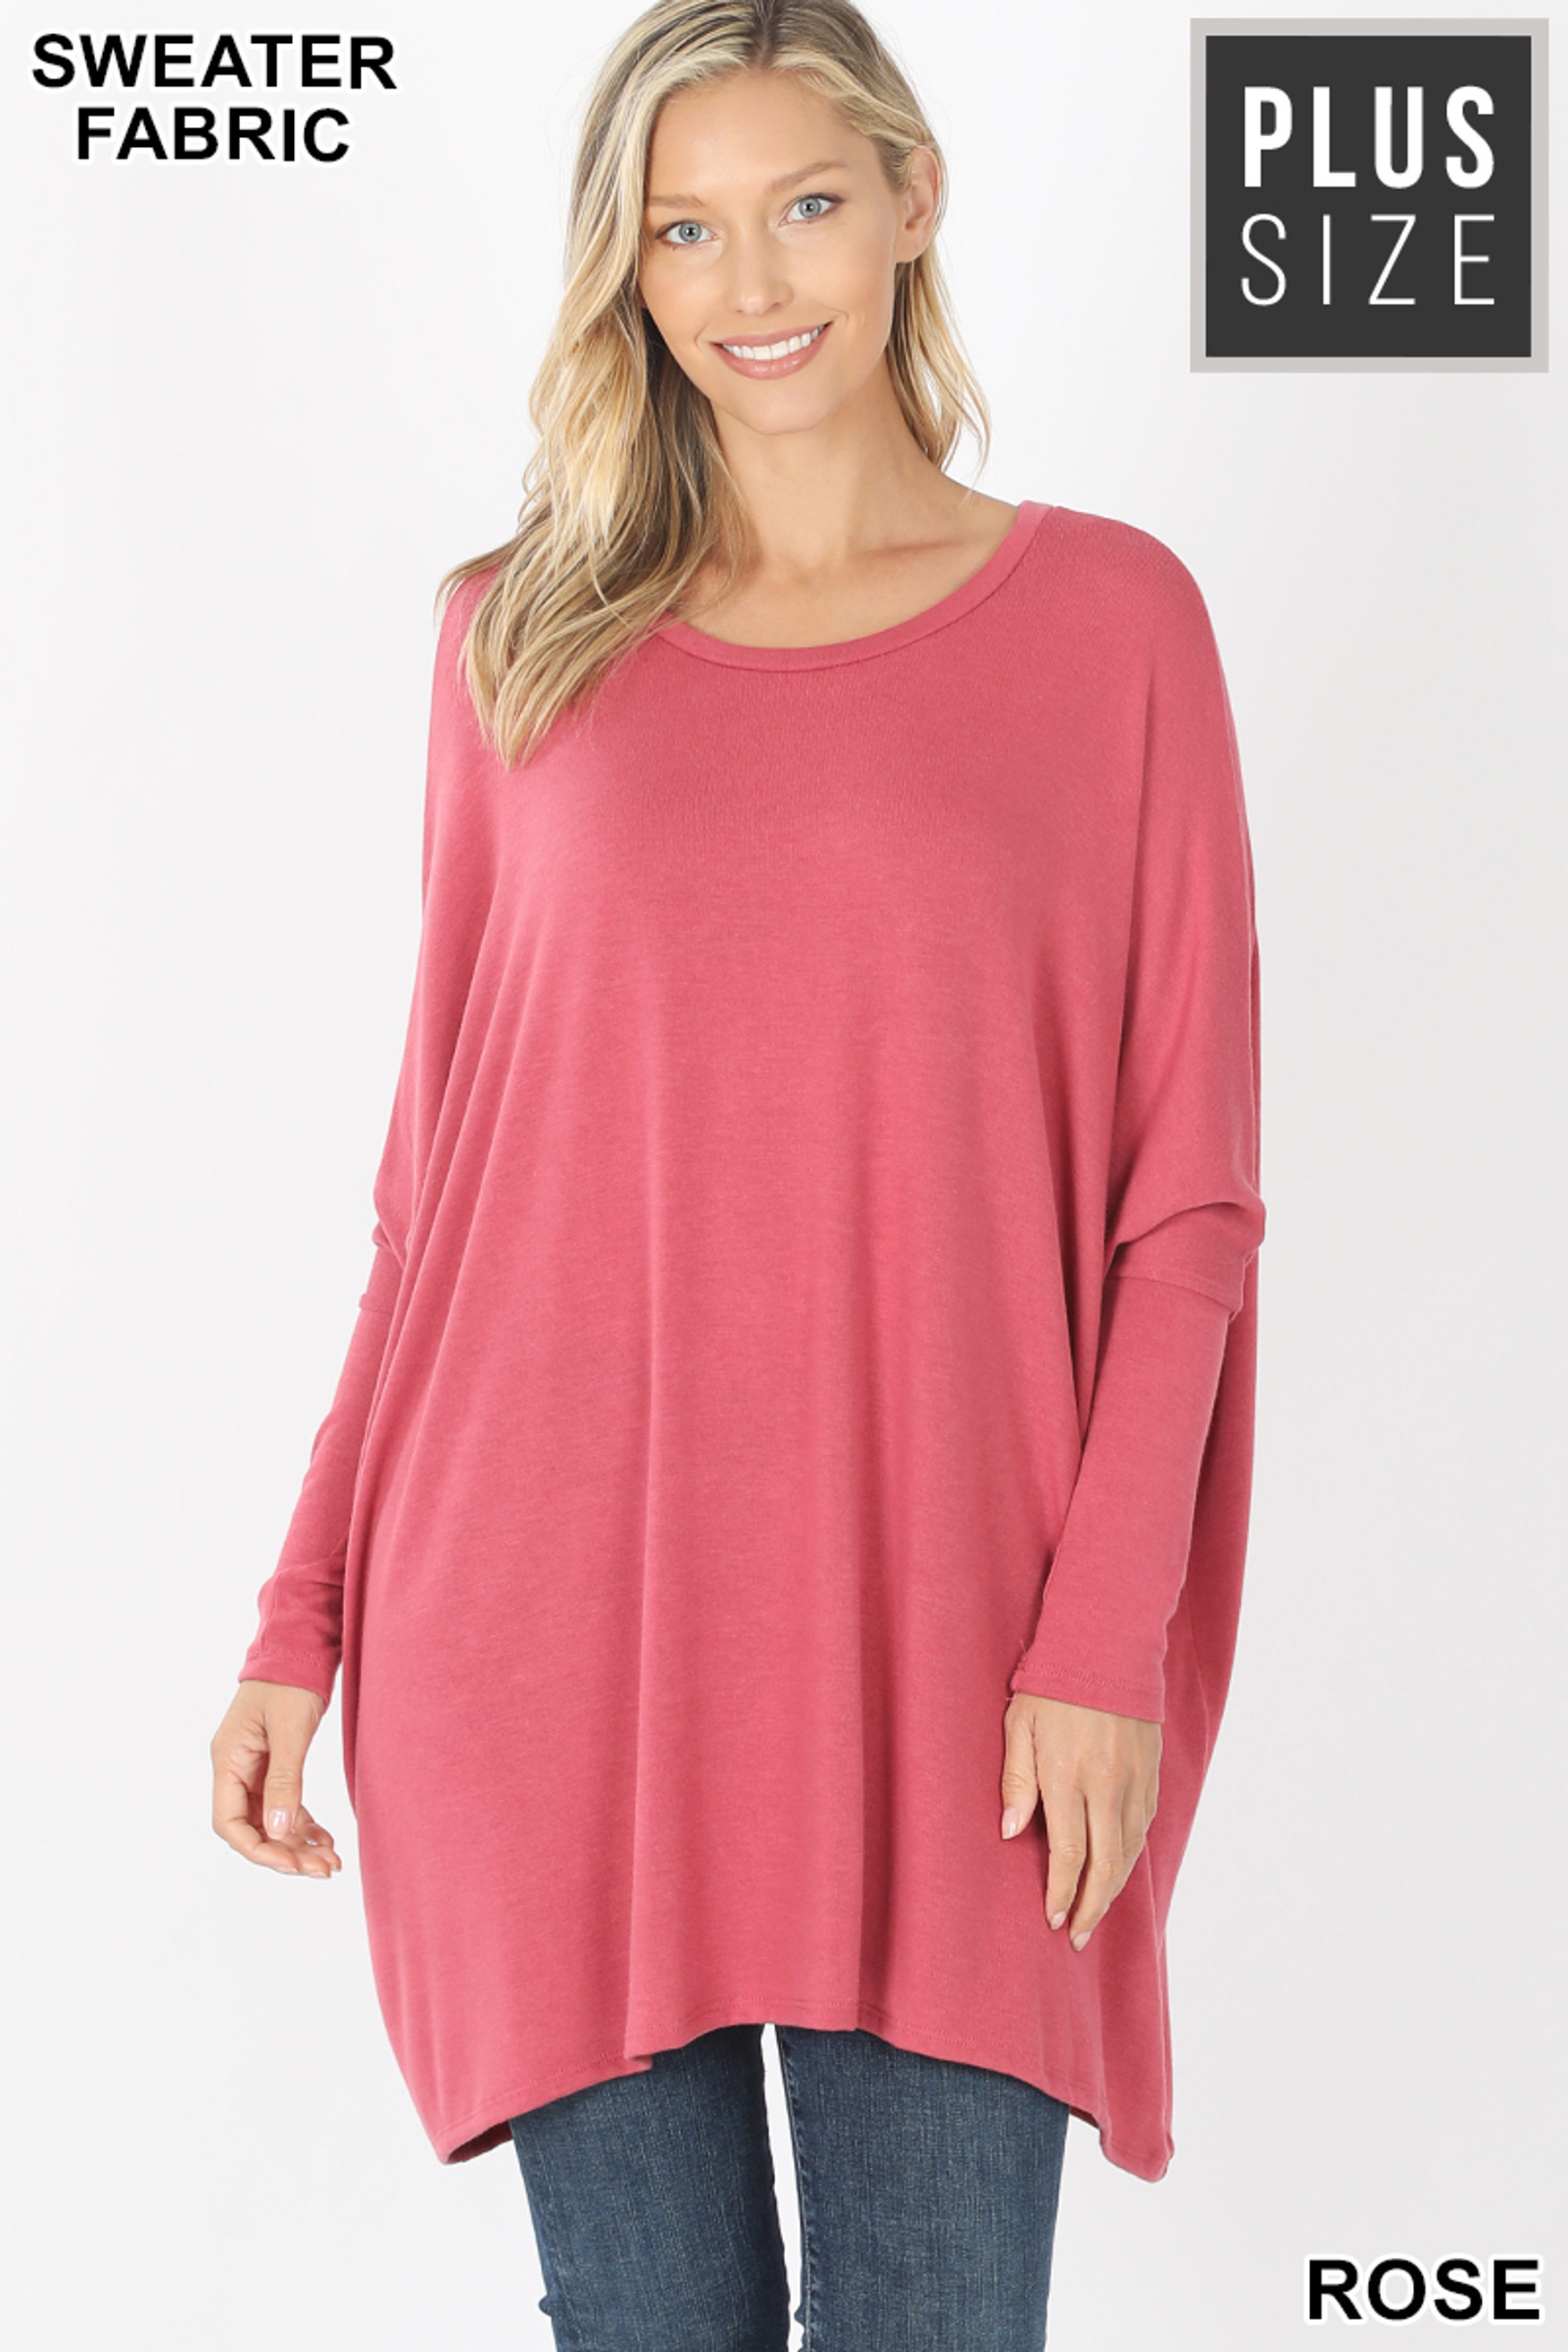 Front view of Rose Oversized Round Neck Poncho Plus Size Sweater